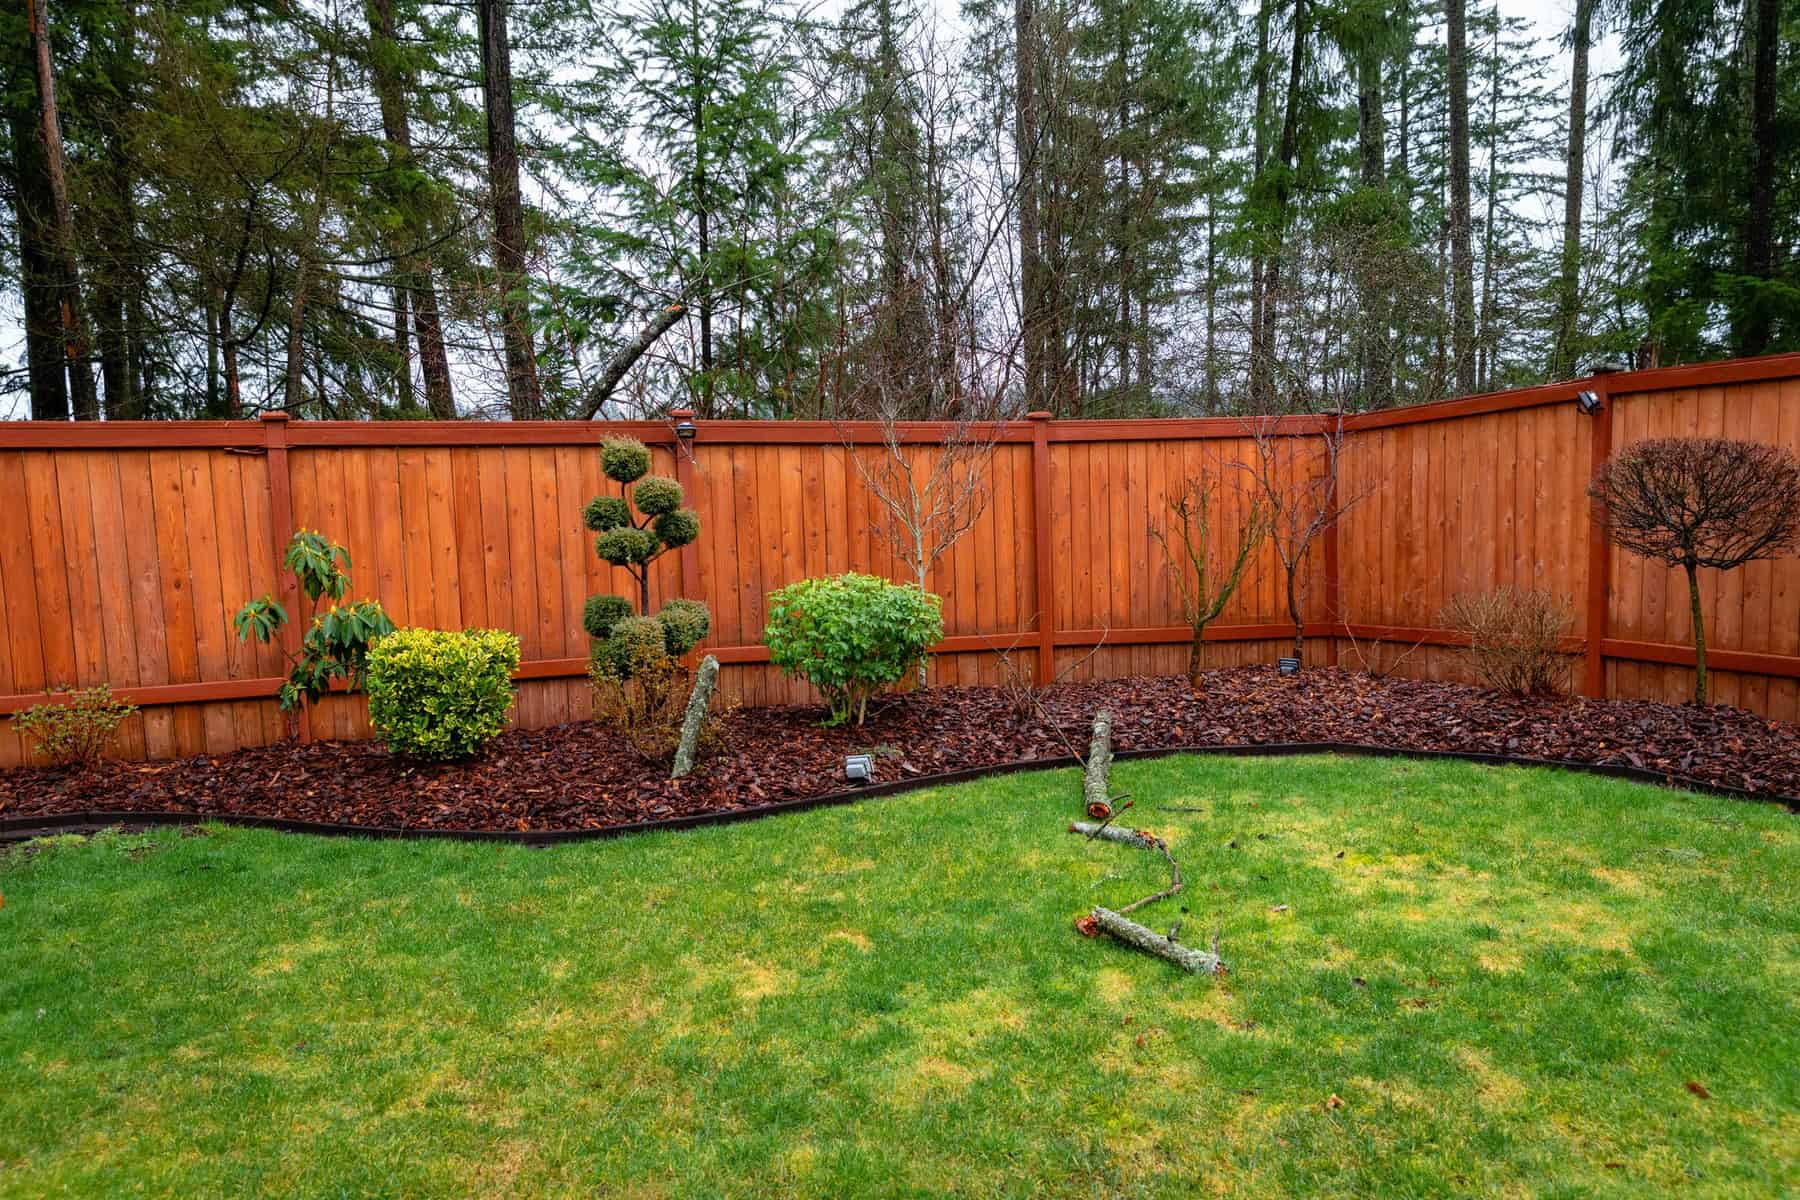 Backyard stained wooden fences